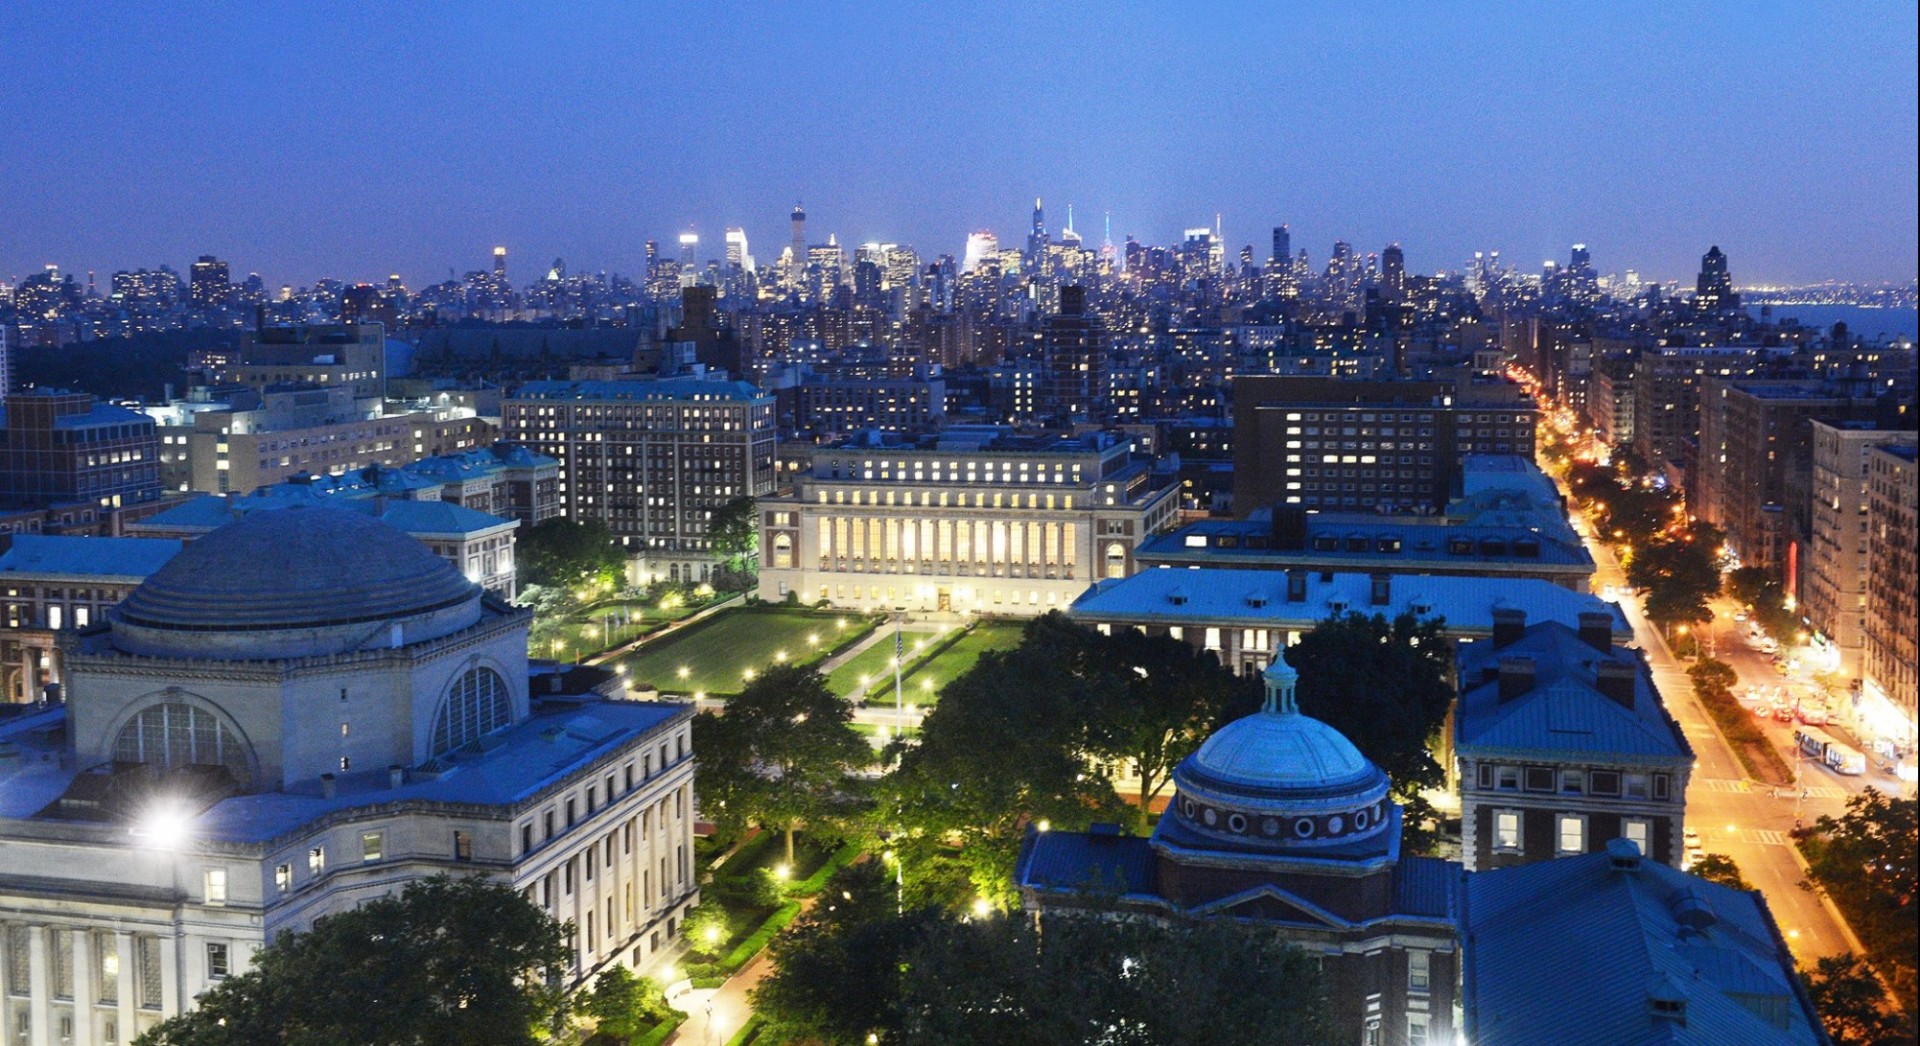 Aerial View of Columbia University's Morningside Campus